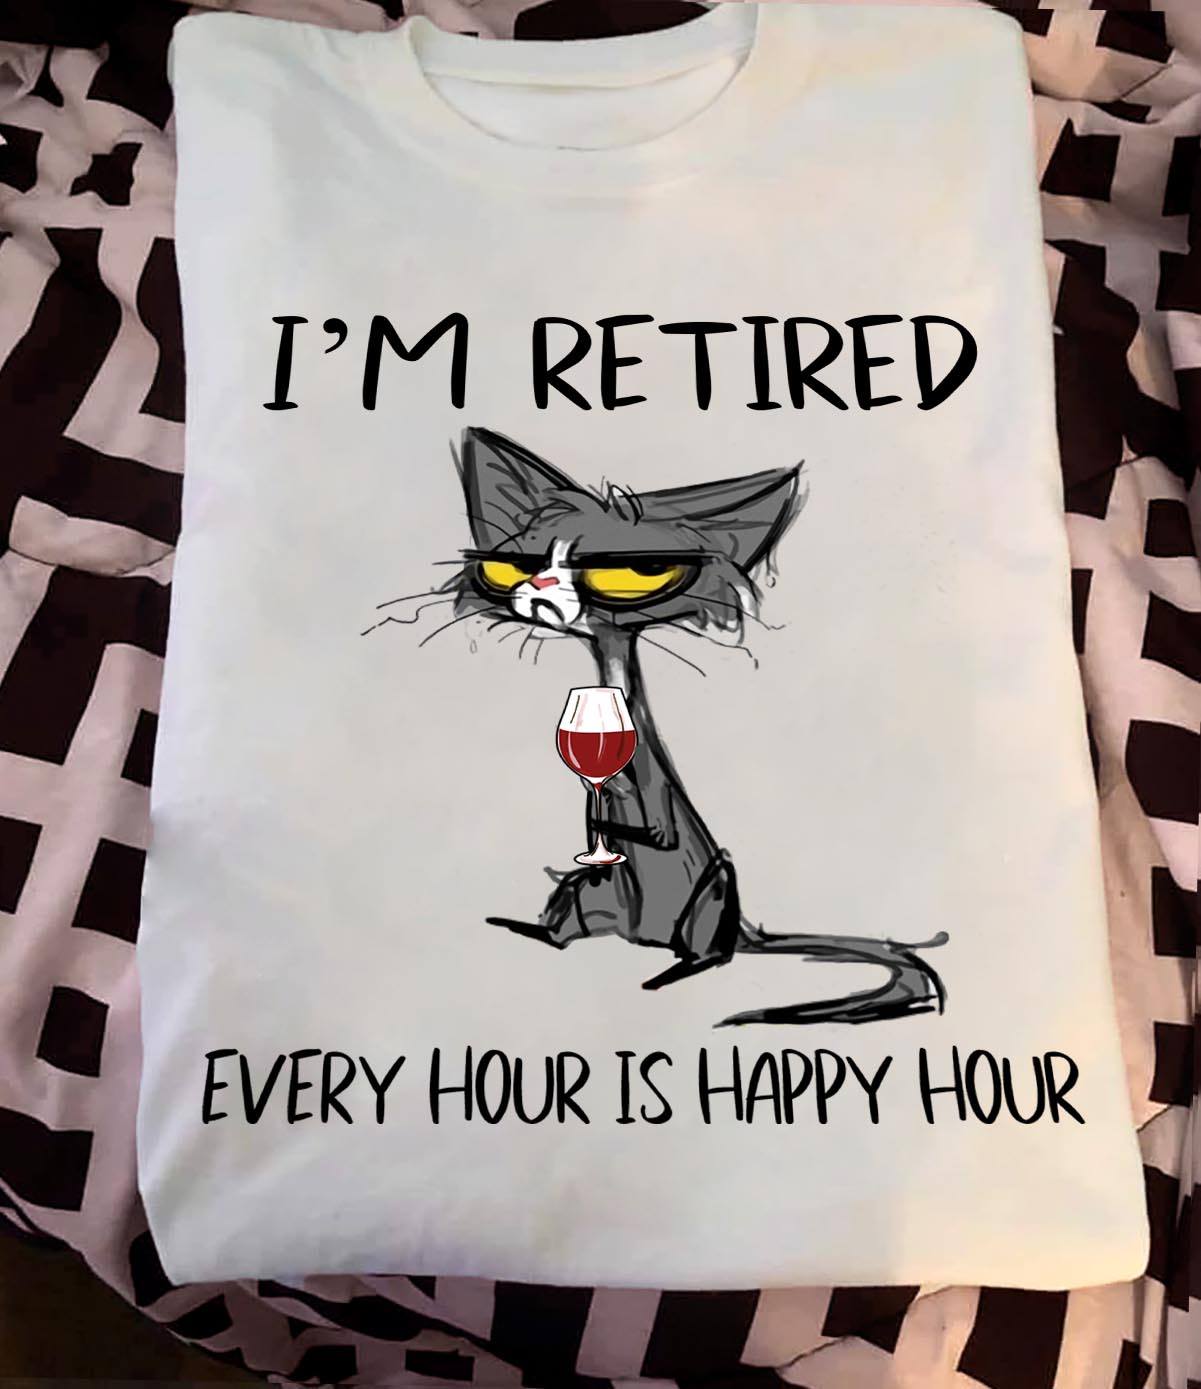 I'm retired every hour is happy hour